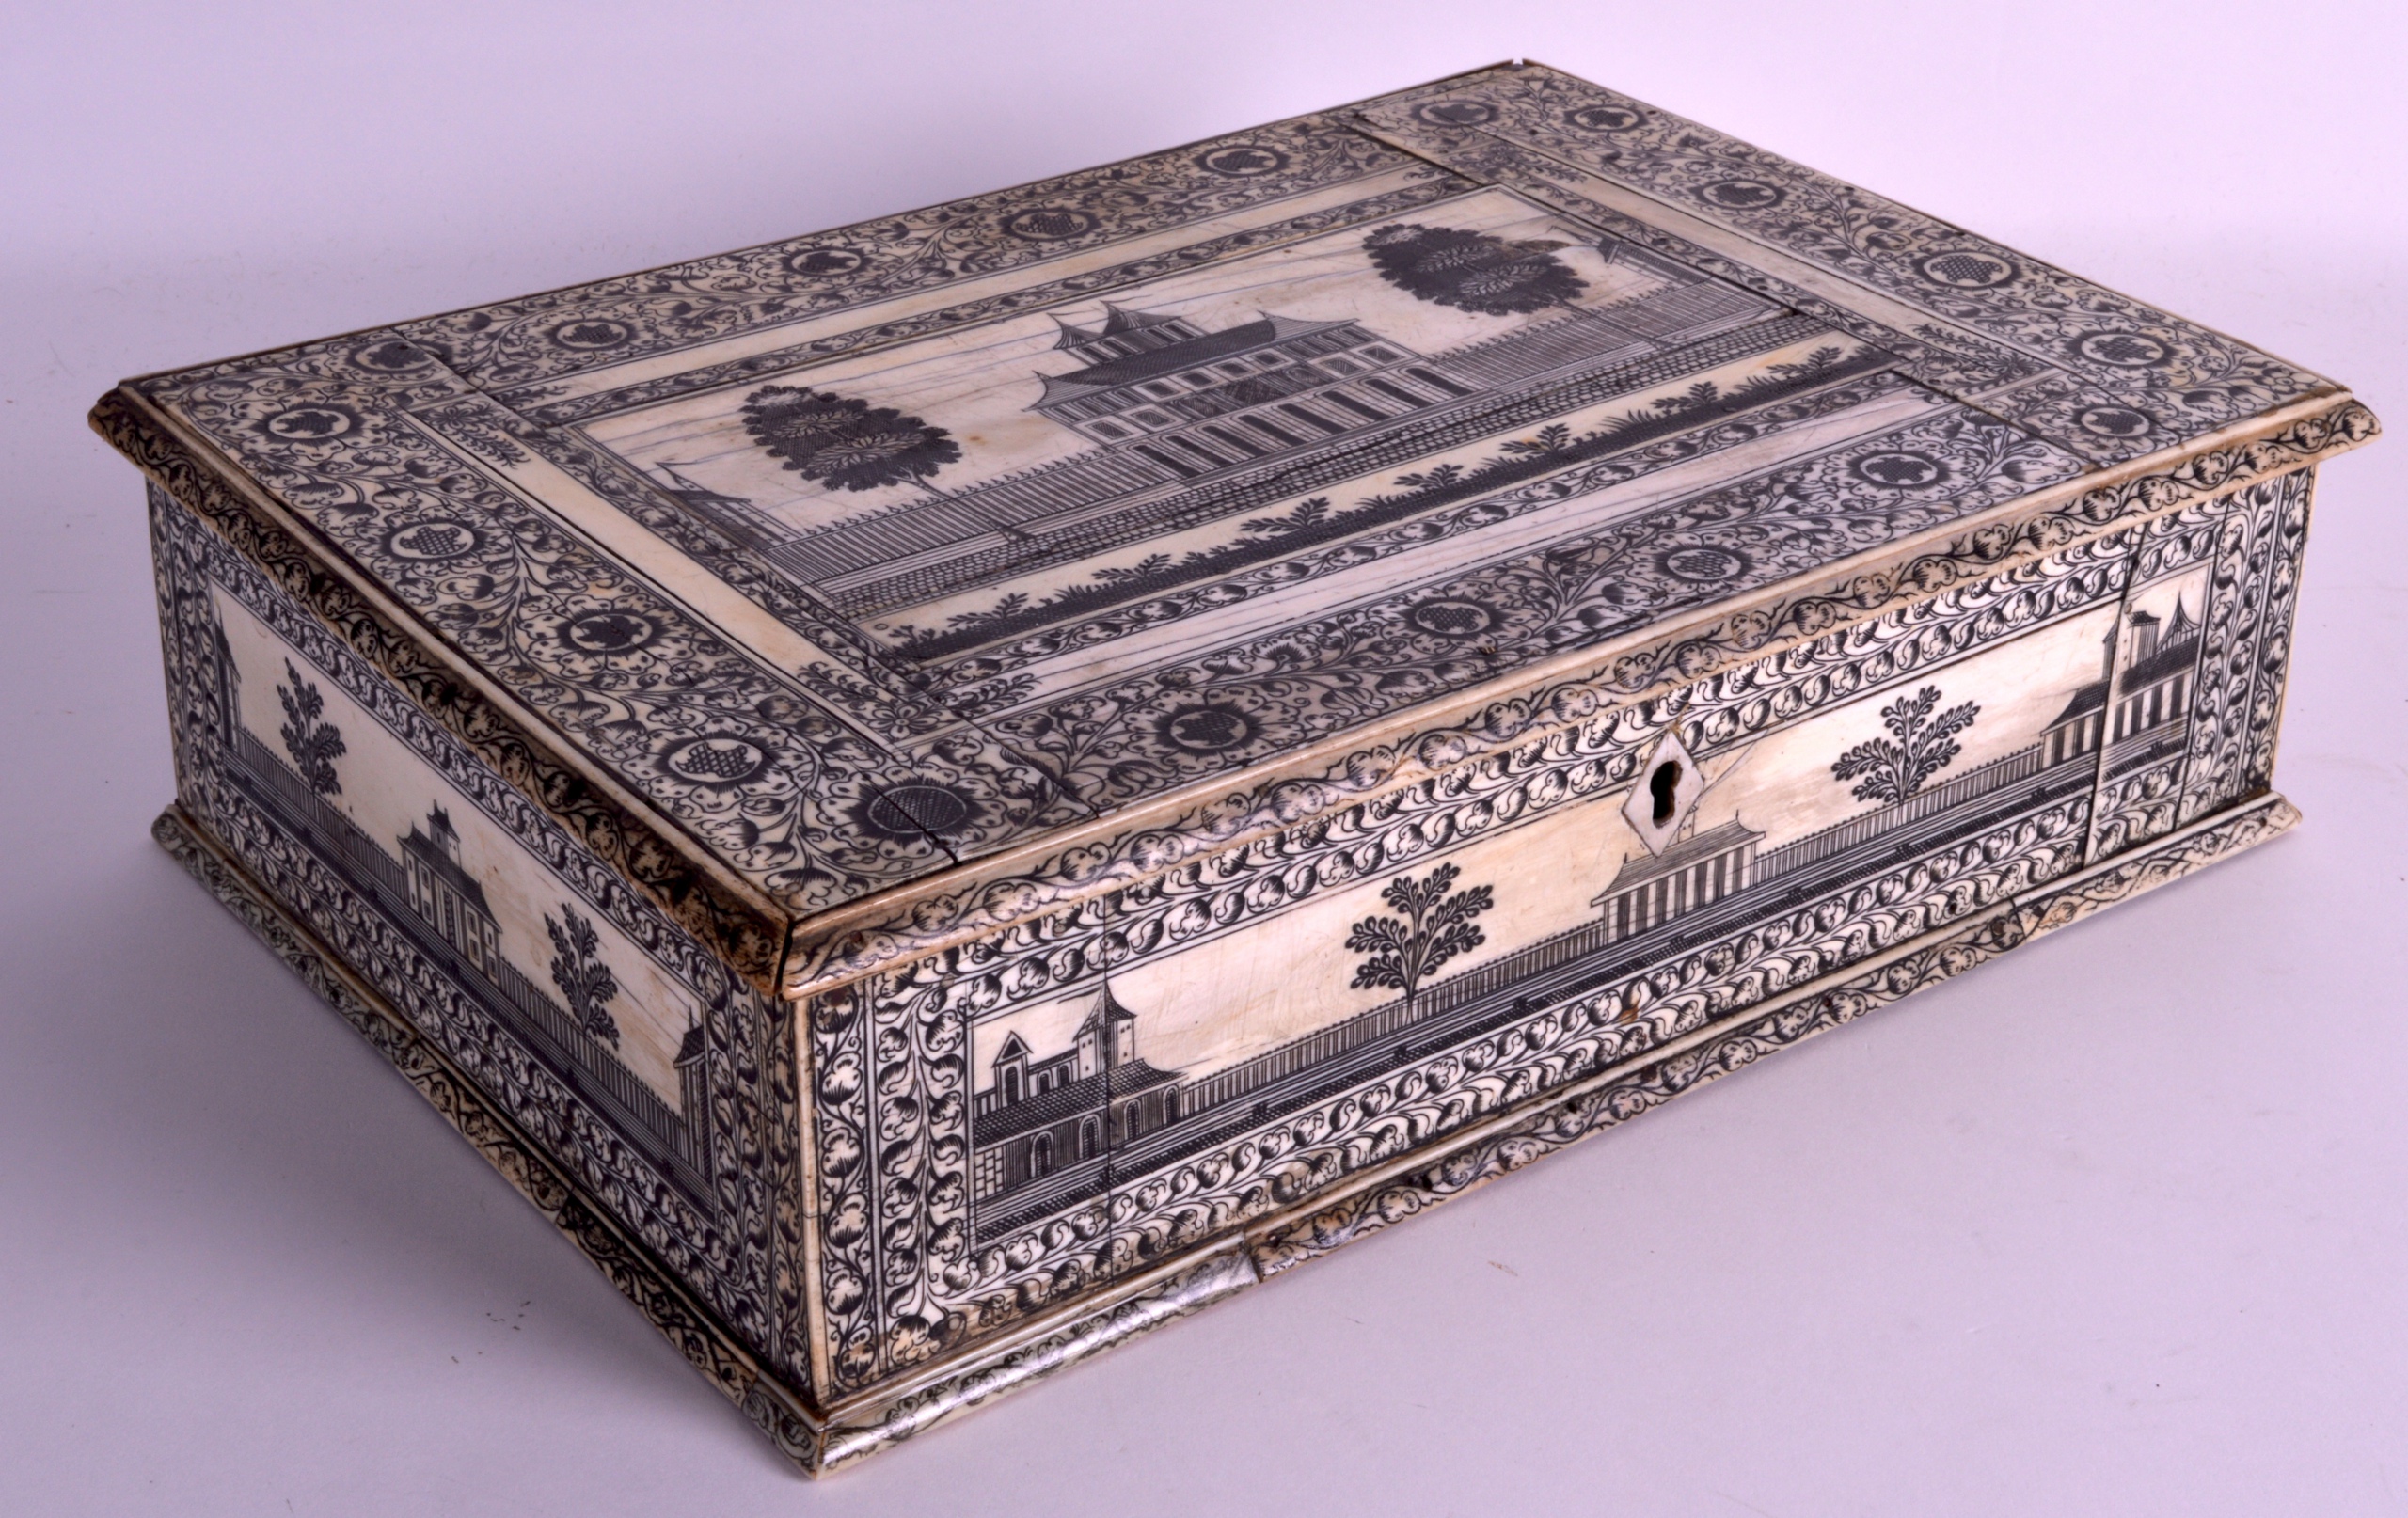 A FINE EARLY 19TH CENTURY ANGLO INDIAN VIZAGAPATAM RECTANGULAR BOX the top engraved with a